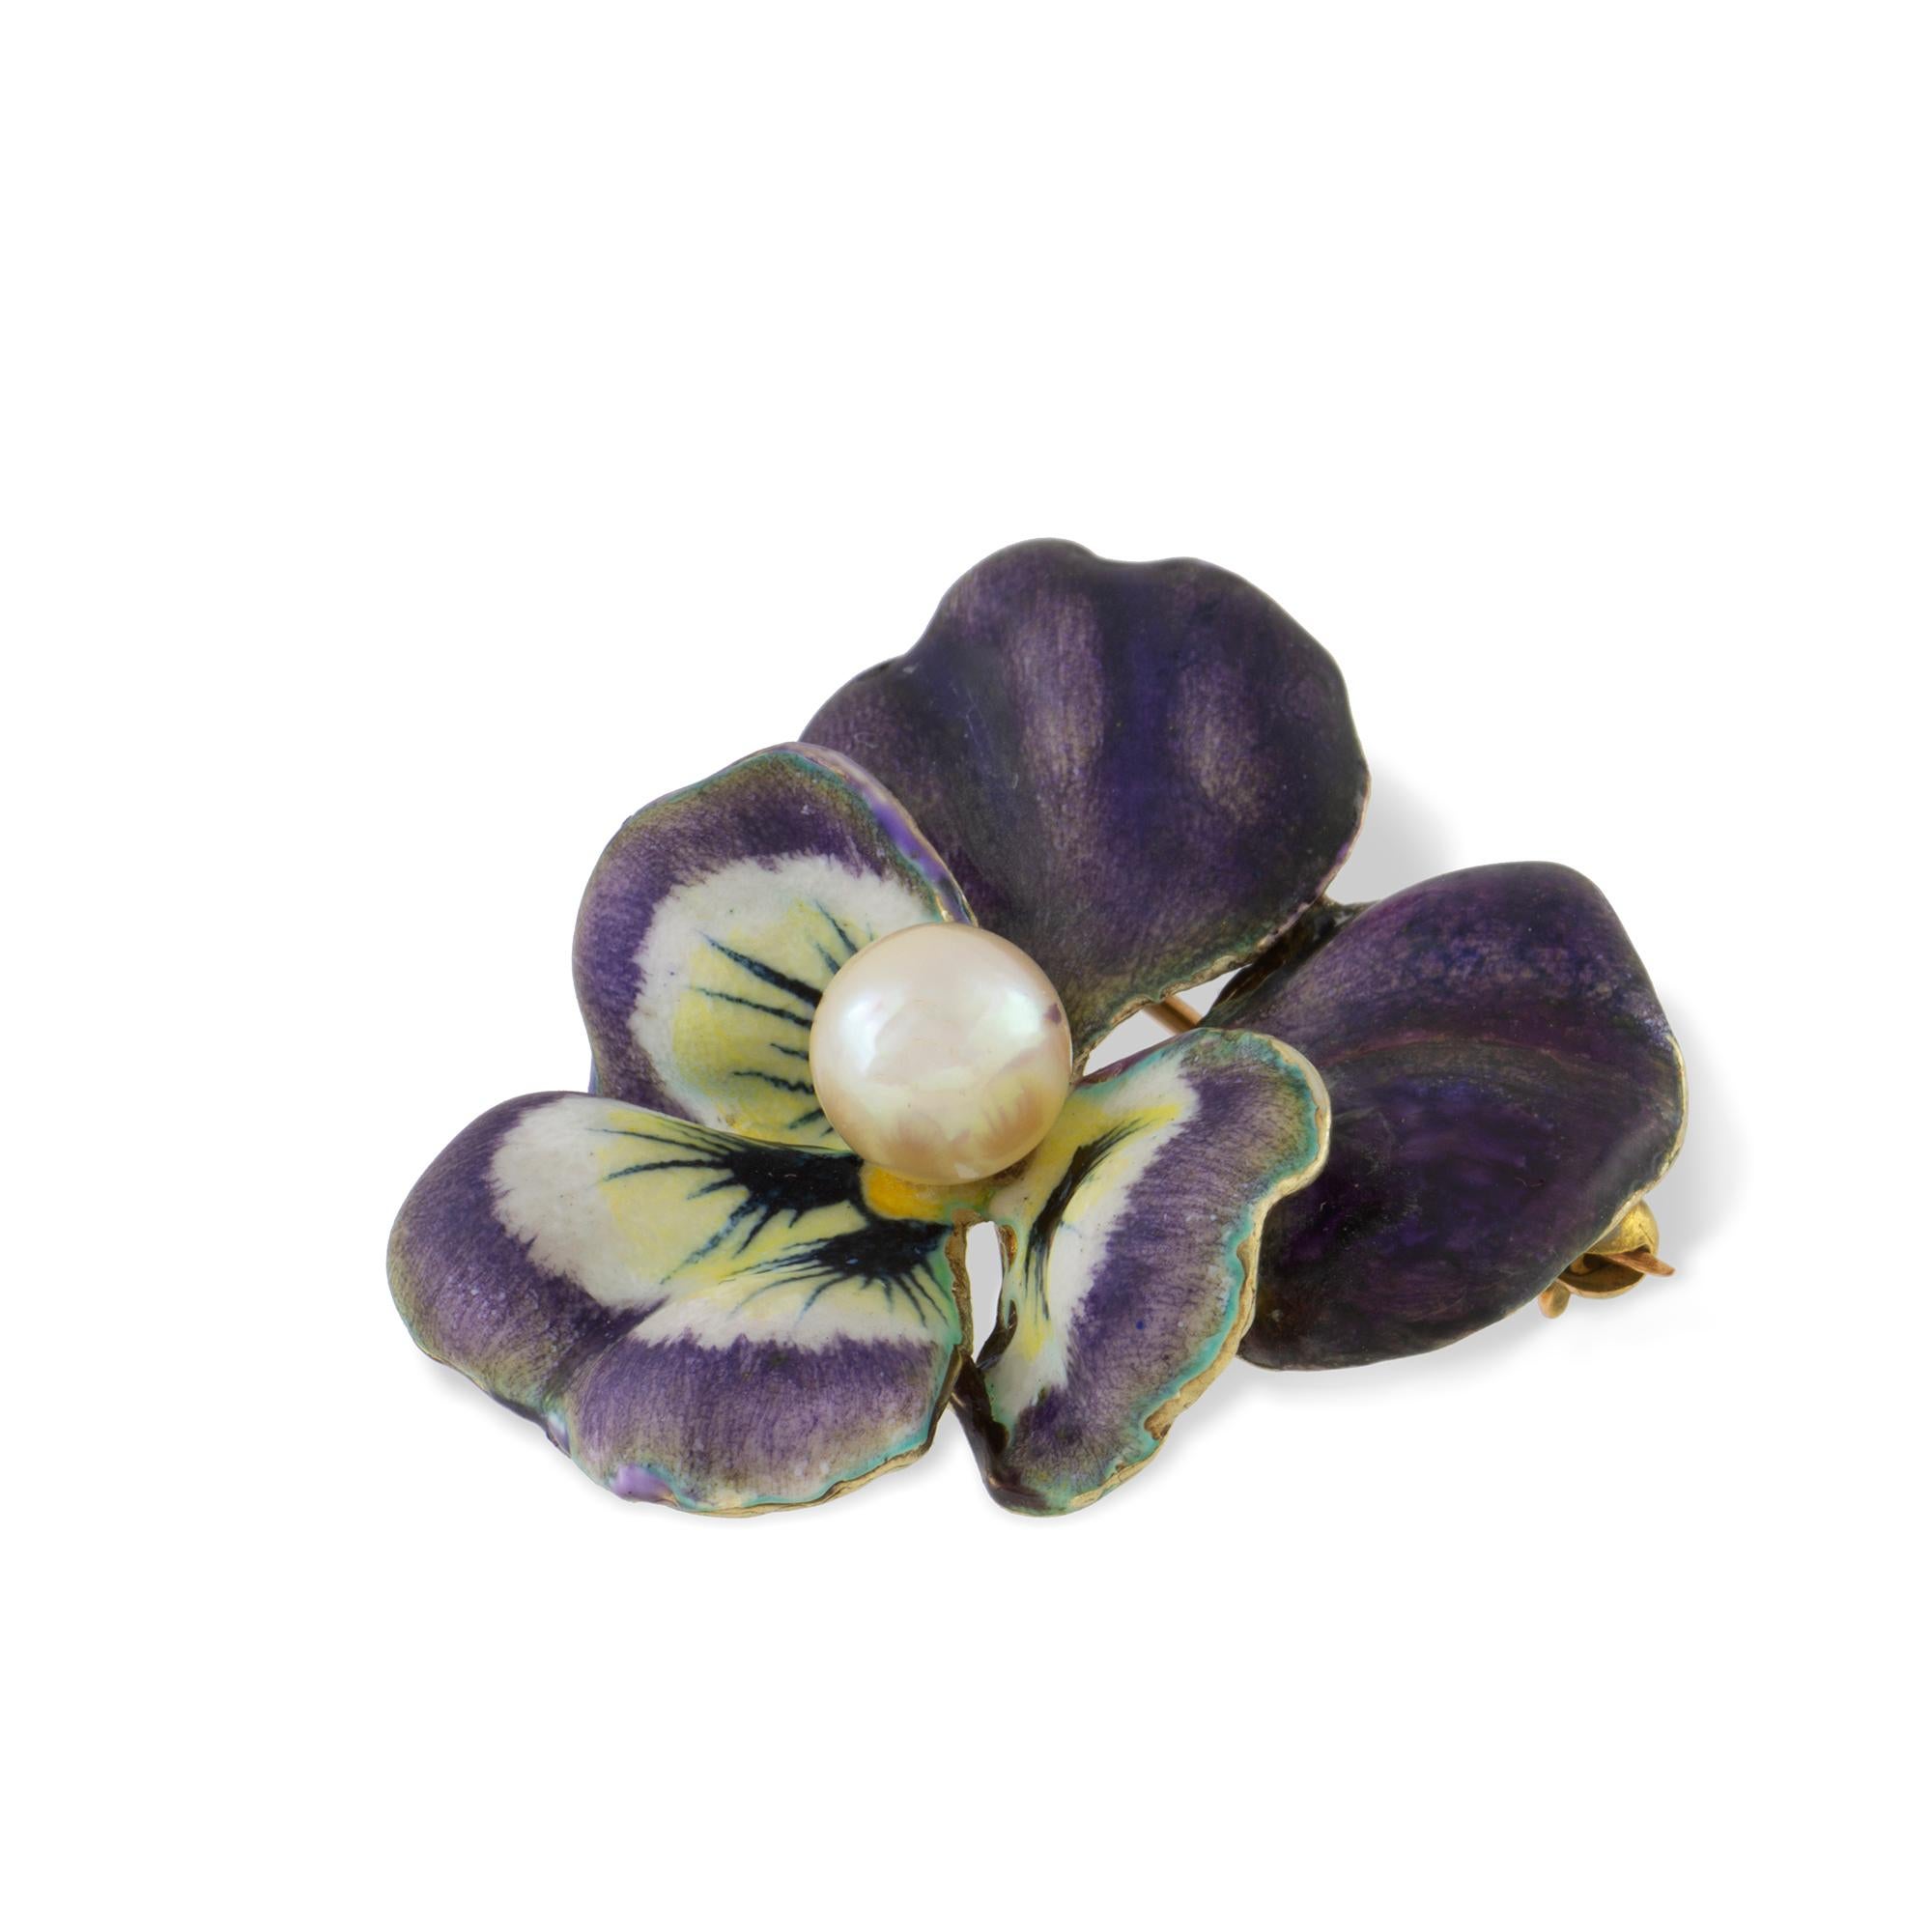 An antique enamel and pearl pansy brooch, the round pearl measuring approximately 6mm set to the centre of five realistically carved and enamelled petals with a yellow gold back with brooch and pendant fittings, made in the USA circa 1900 ,